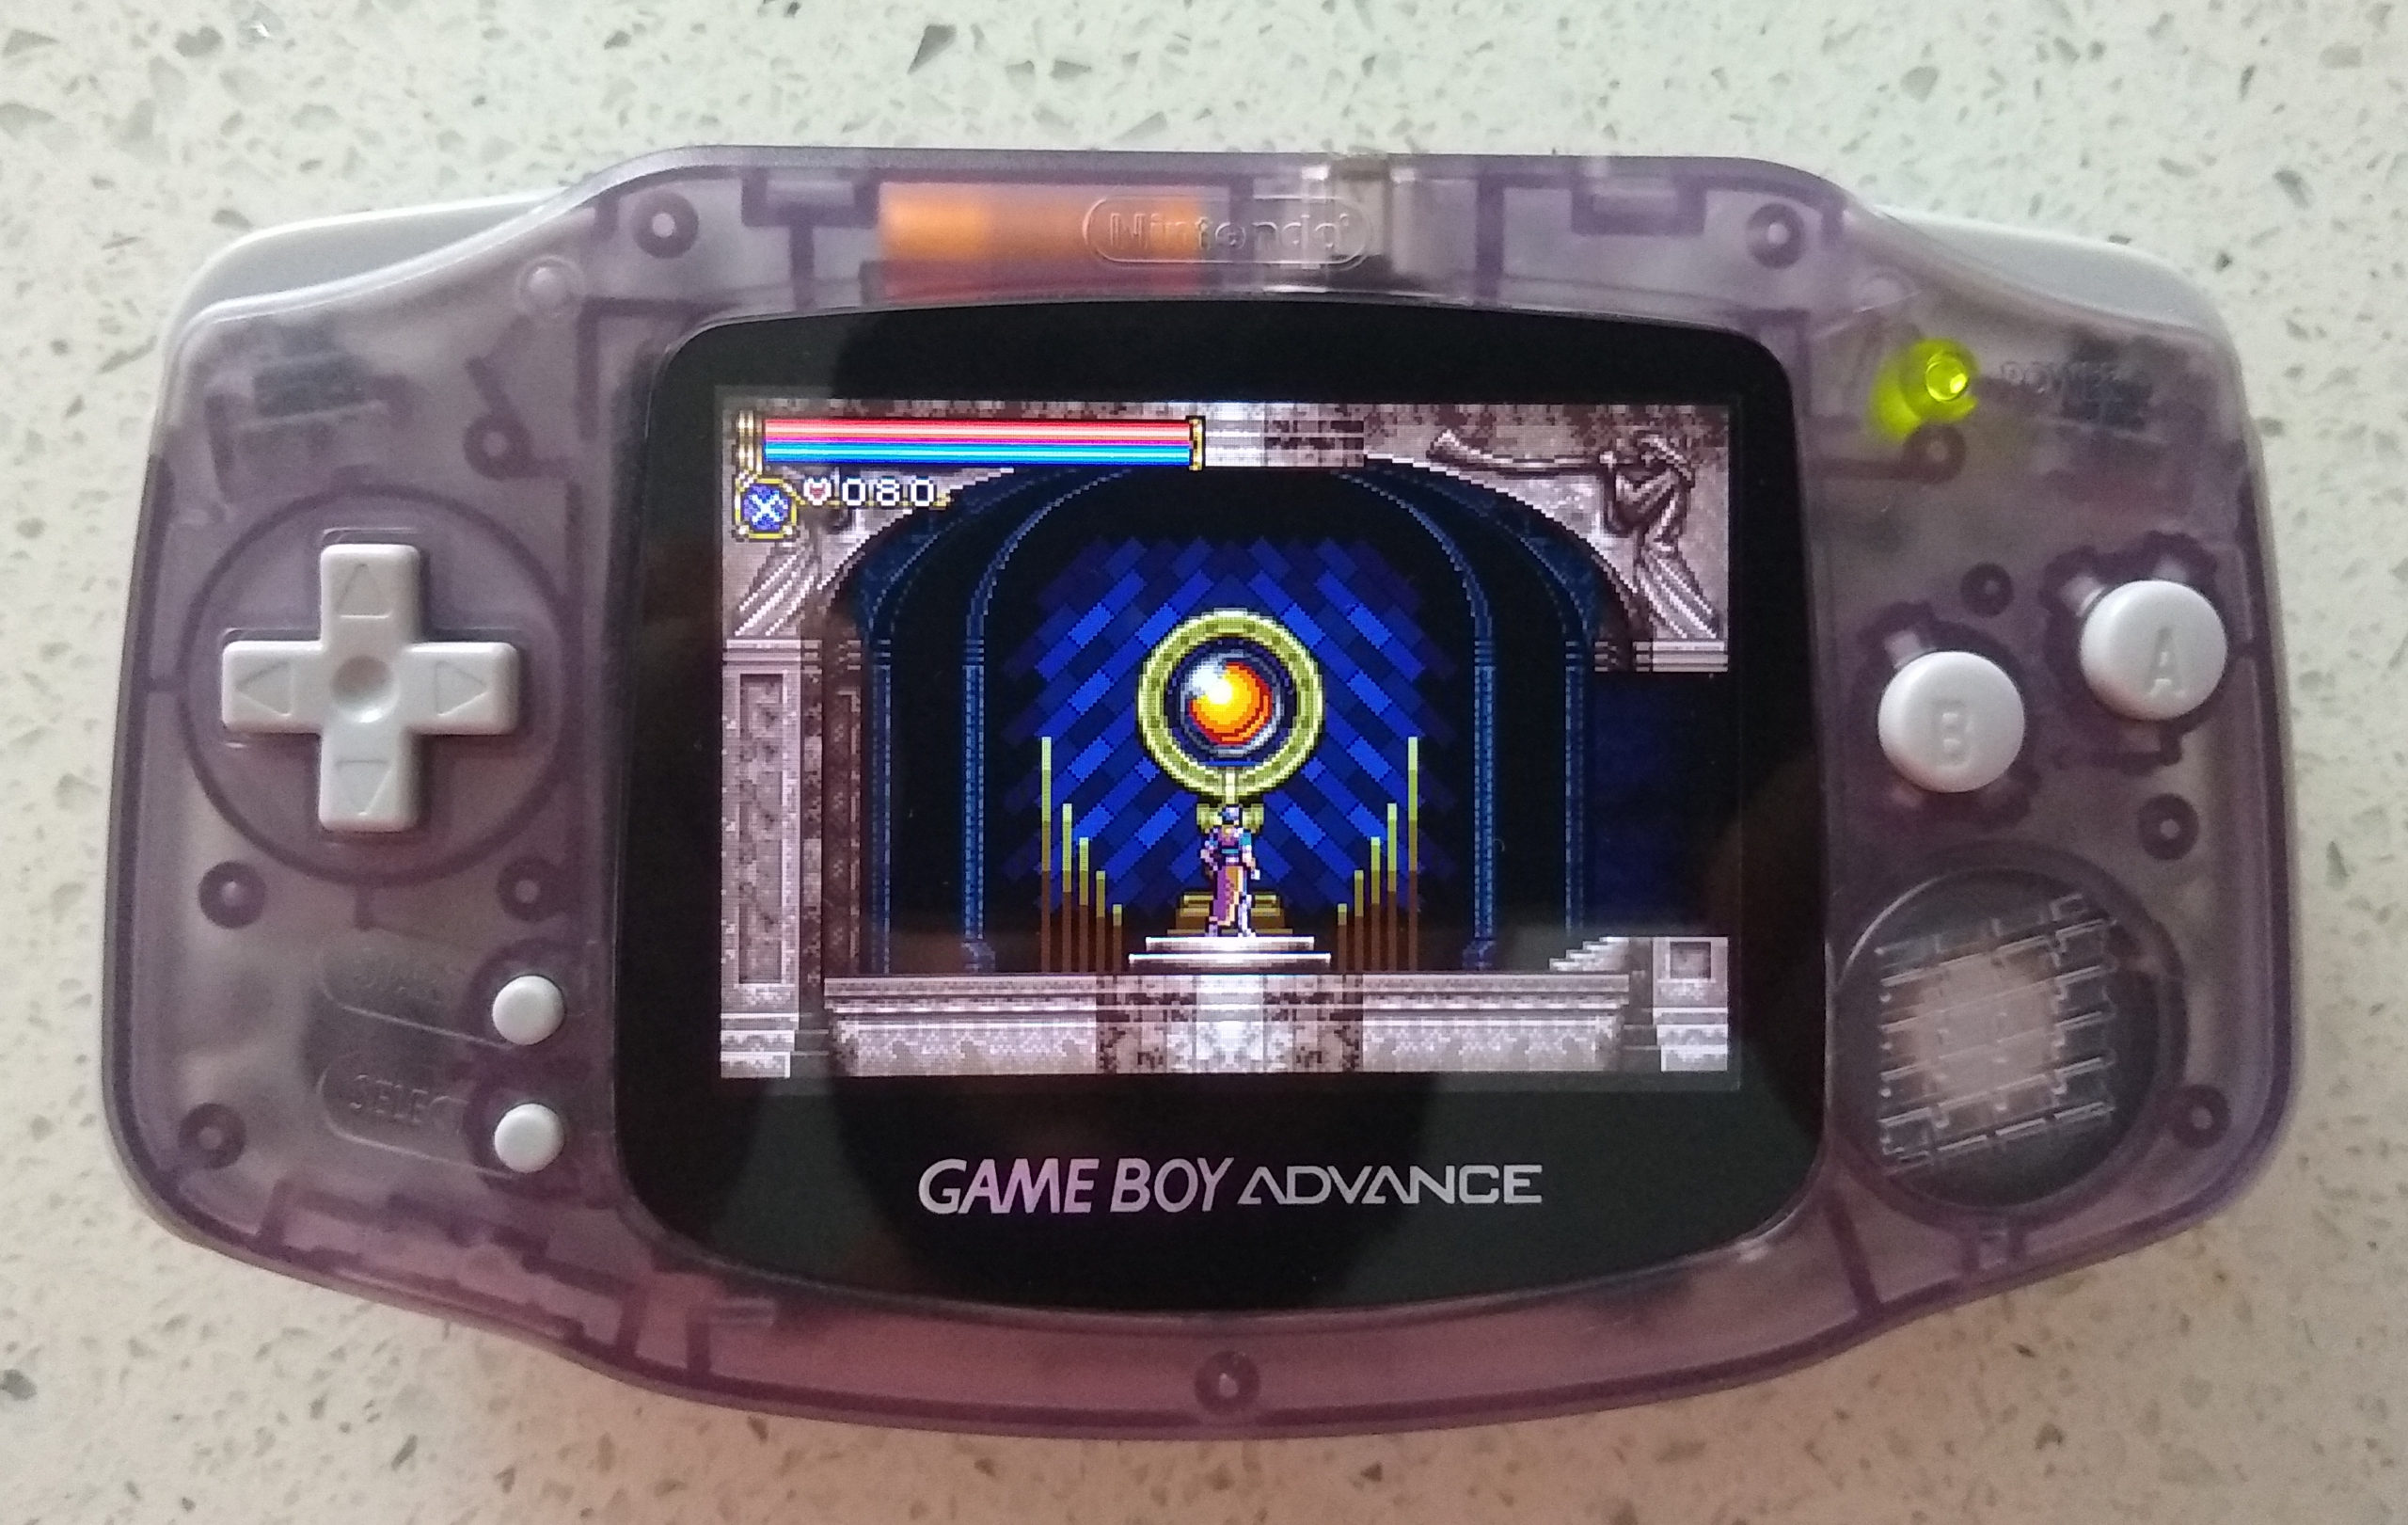 The best thing I ever did to my Game Boy Advance